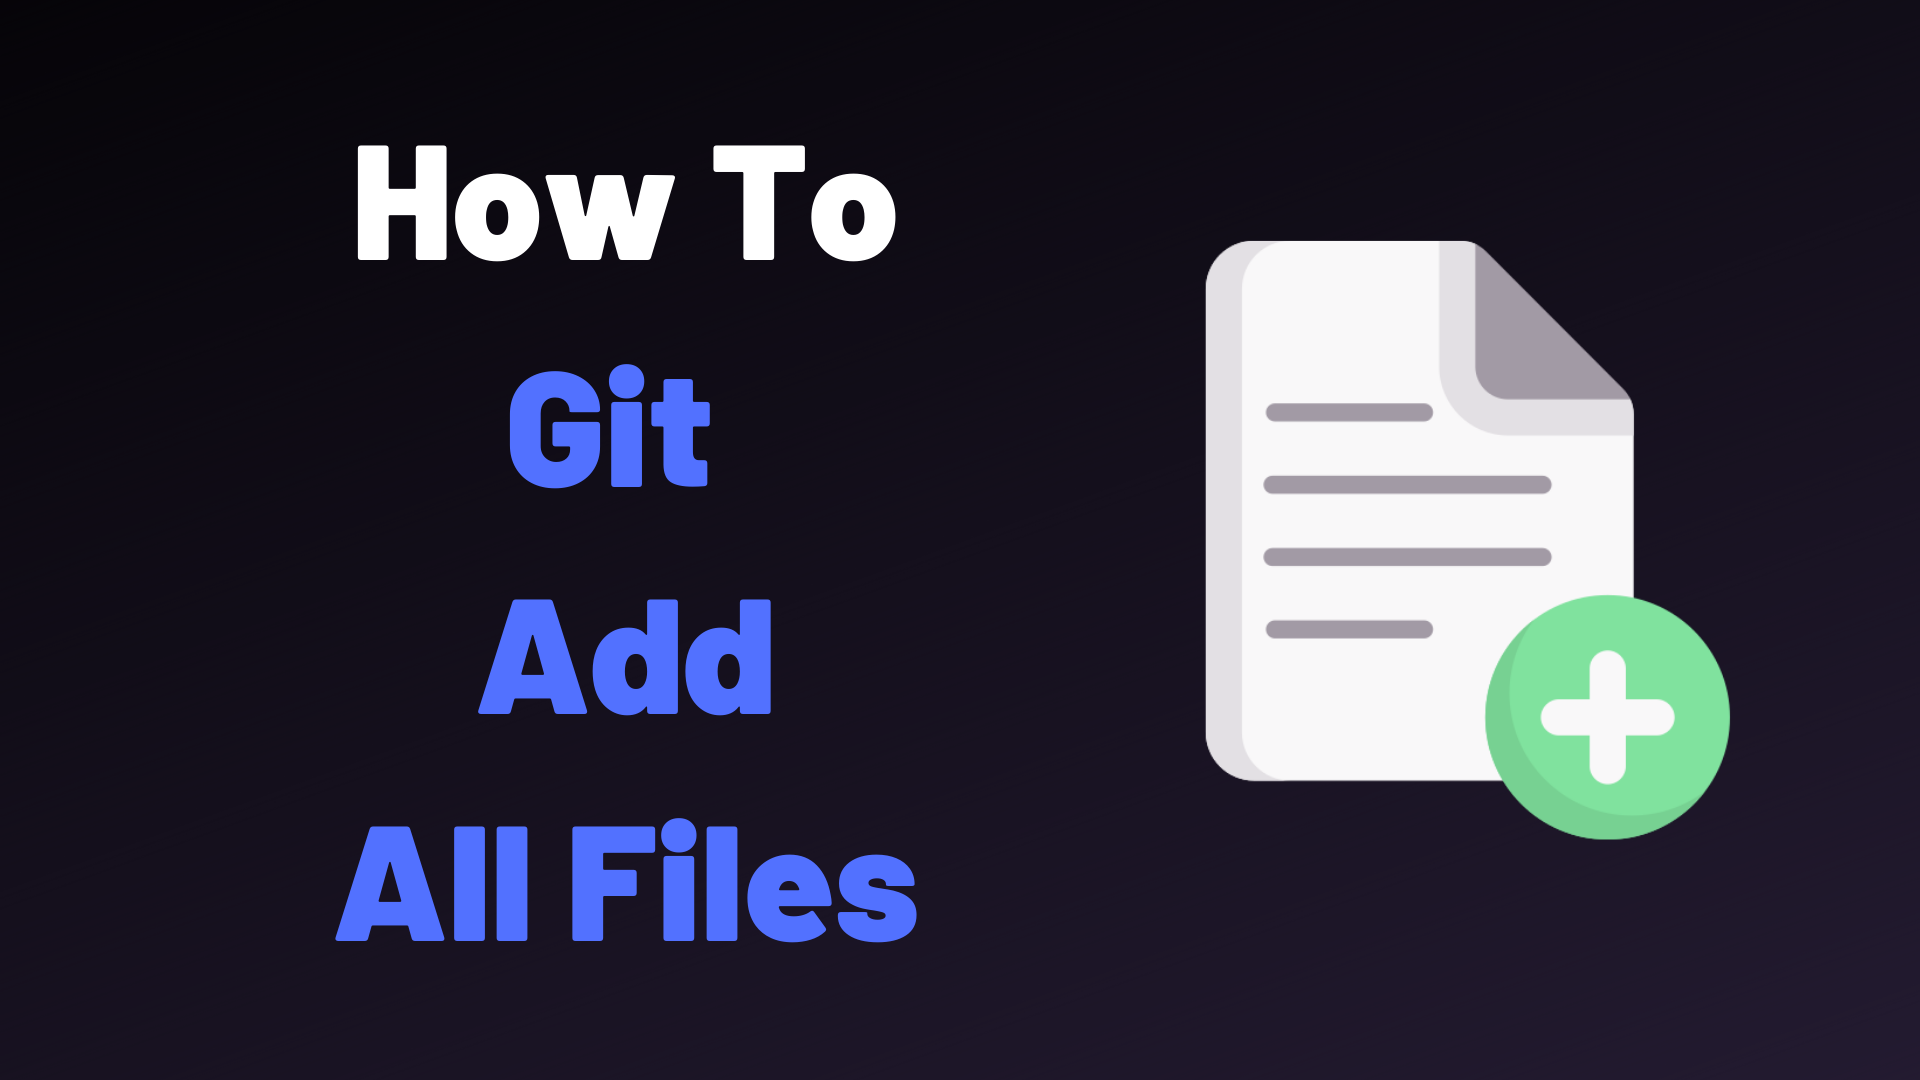 How To Git Add All Files